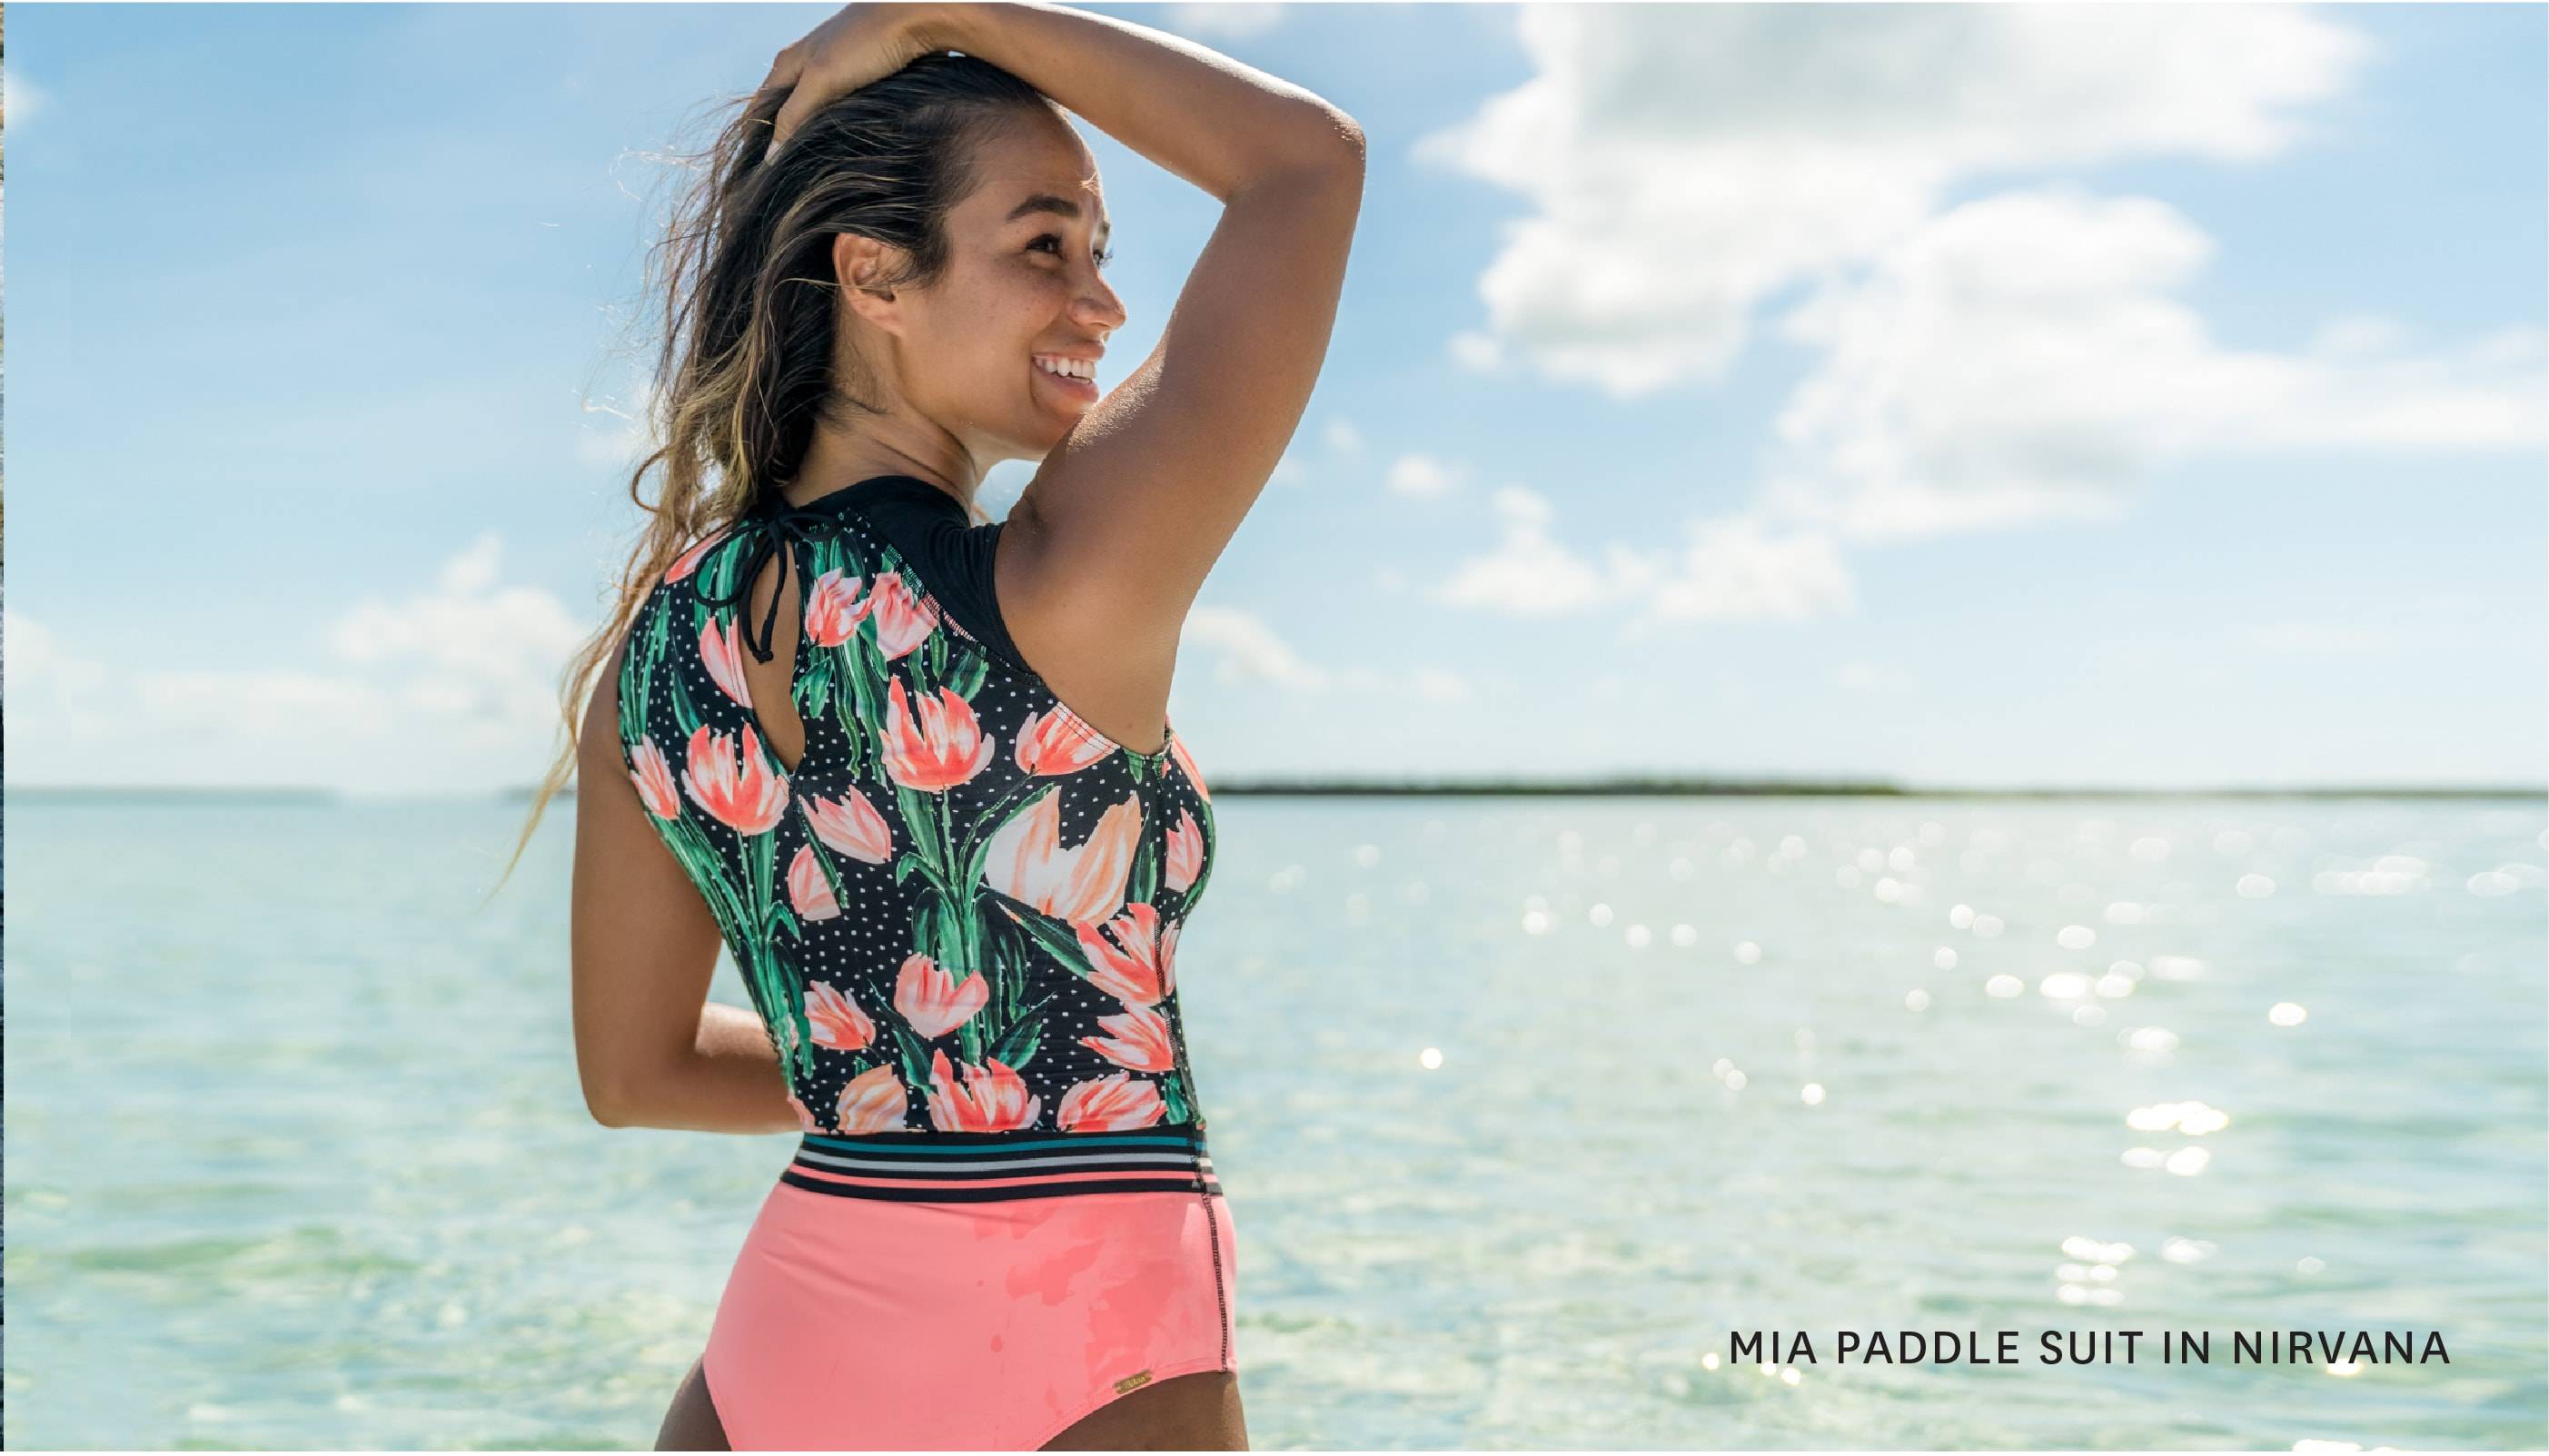 Get the MIA PADDLE SUIT in NIRVANA!